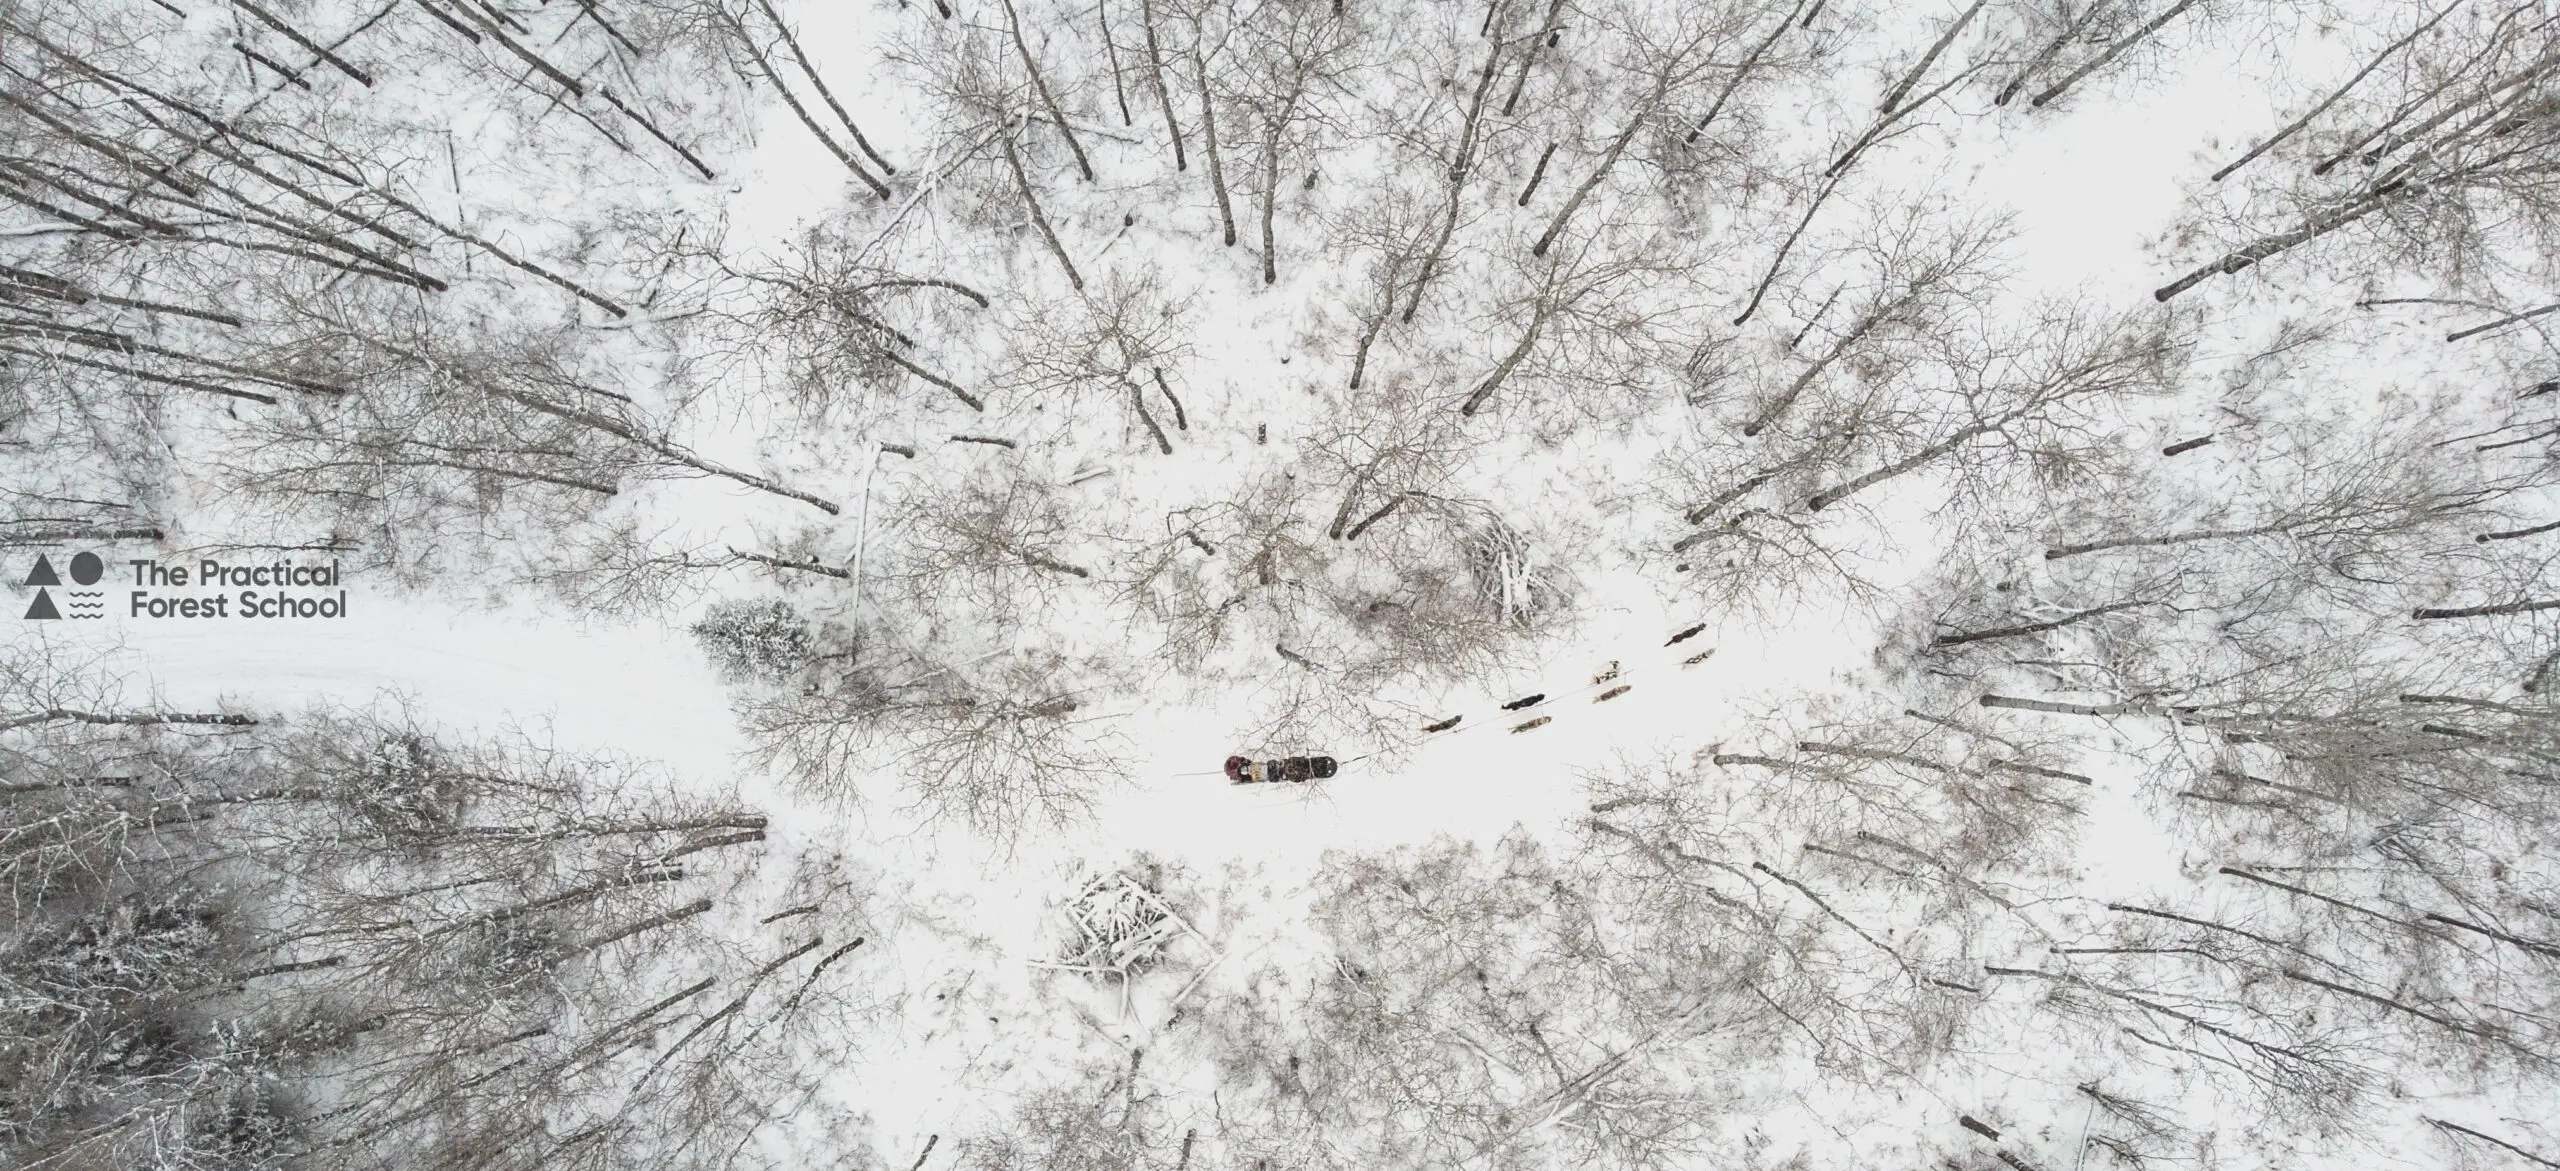 Overhead view of sled dog team in a snowy landscape